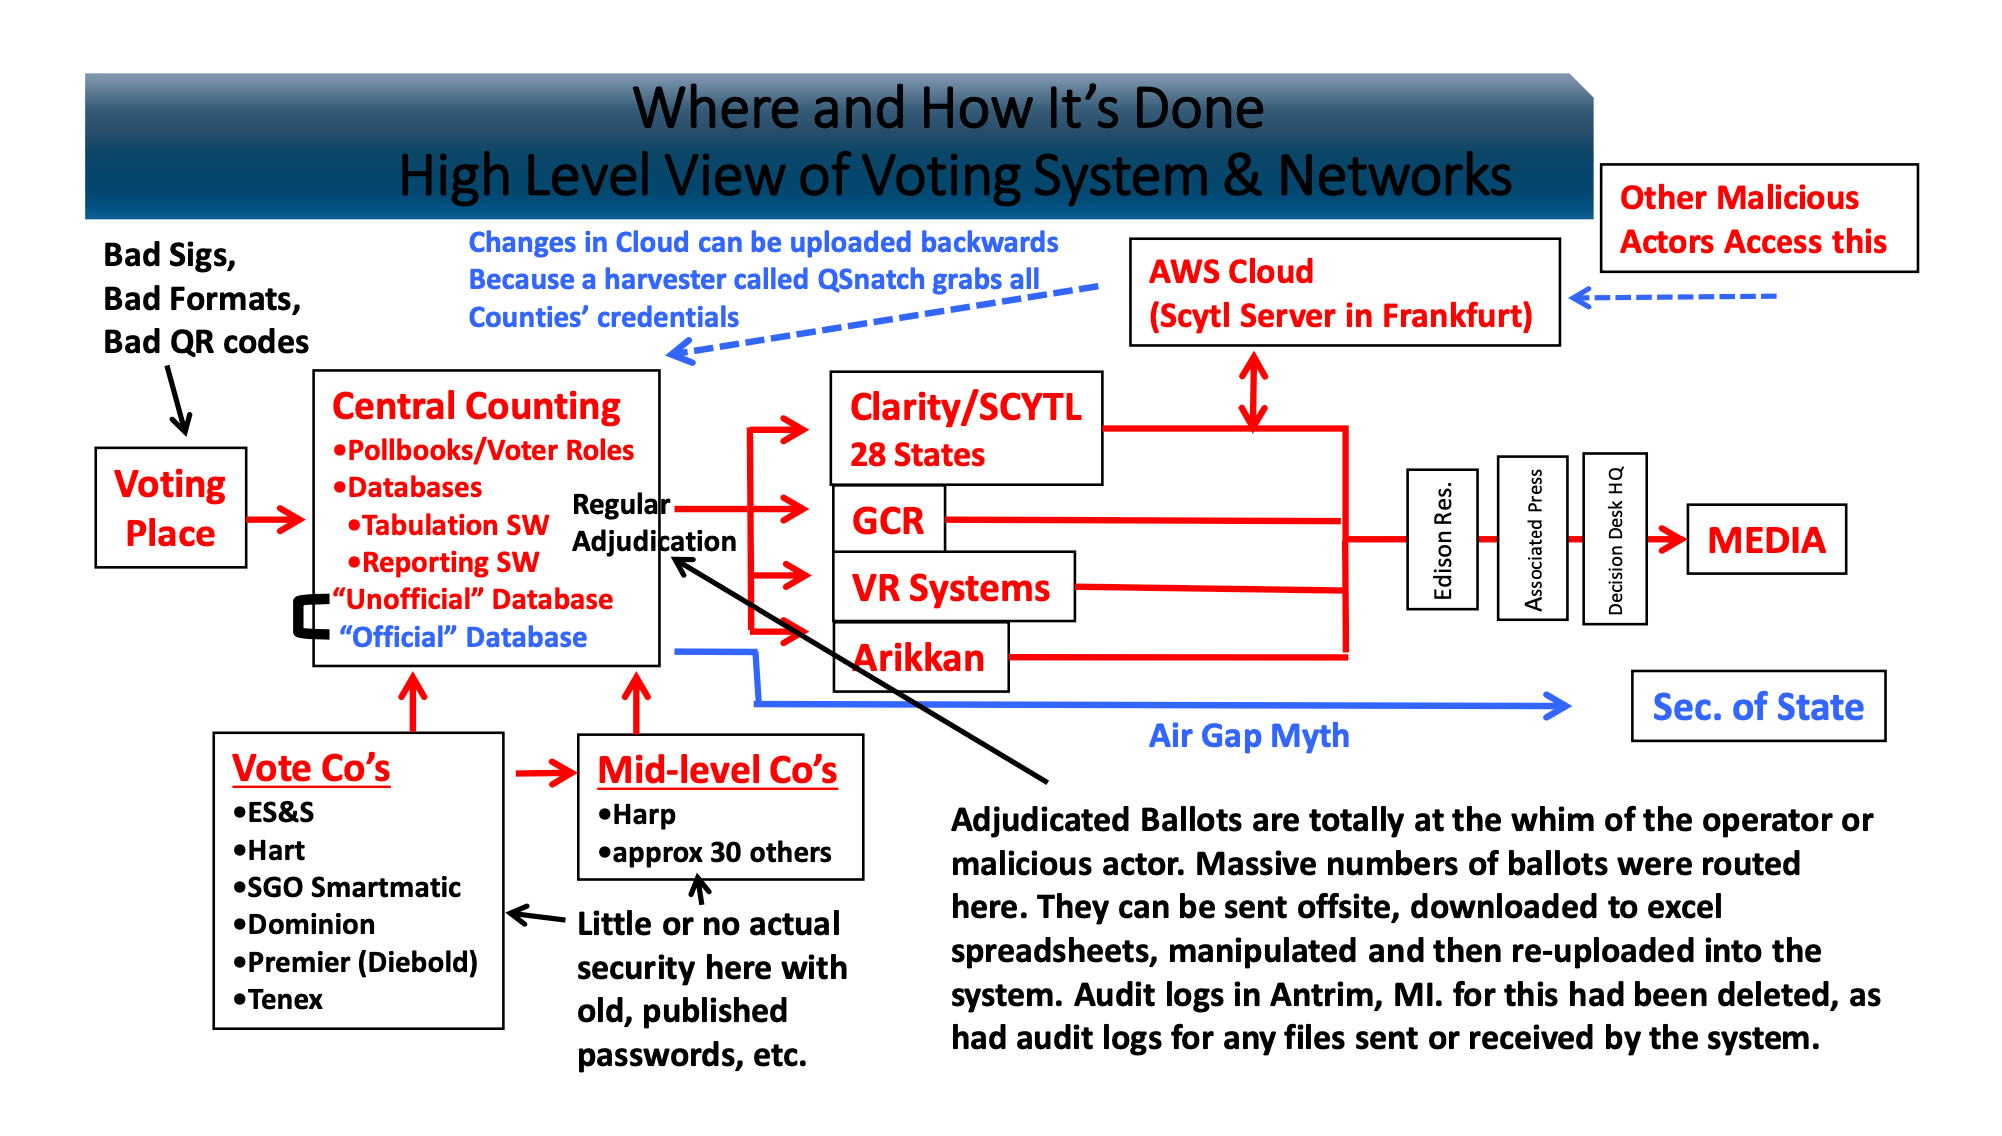 Trump attorney Sidney Powell told a top defence department official that CIA director Gina Haspel had been captured during a fictitious mission to capture the non-existent German server described on this slide.